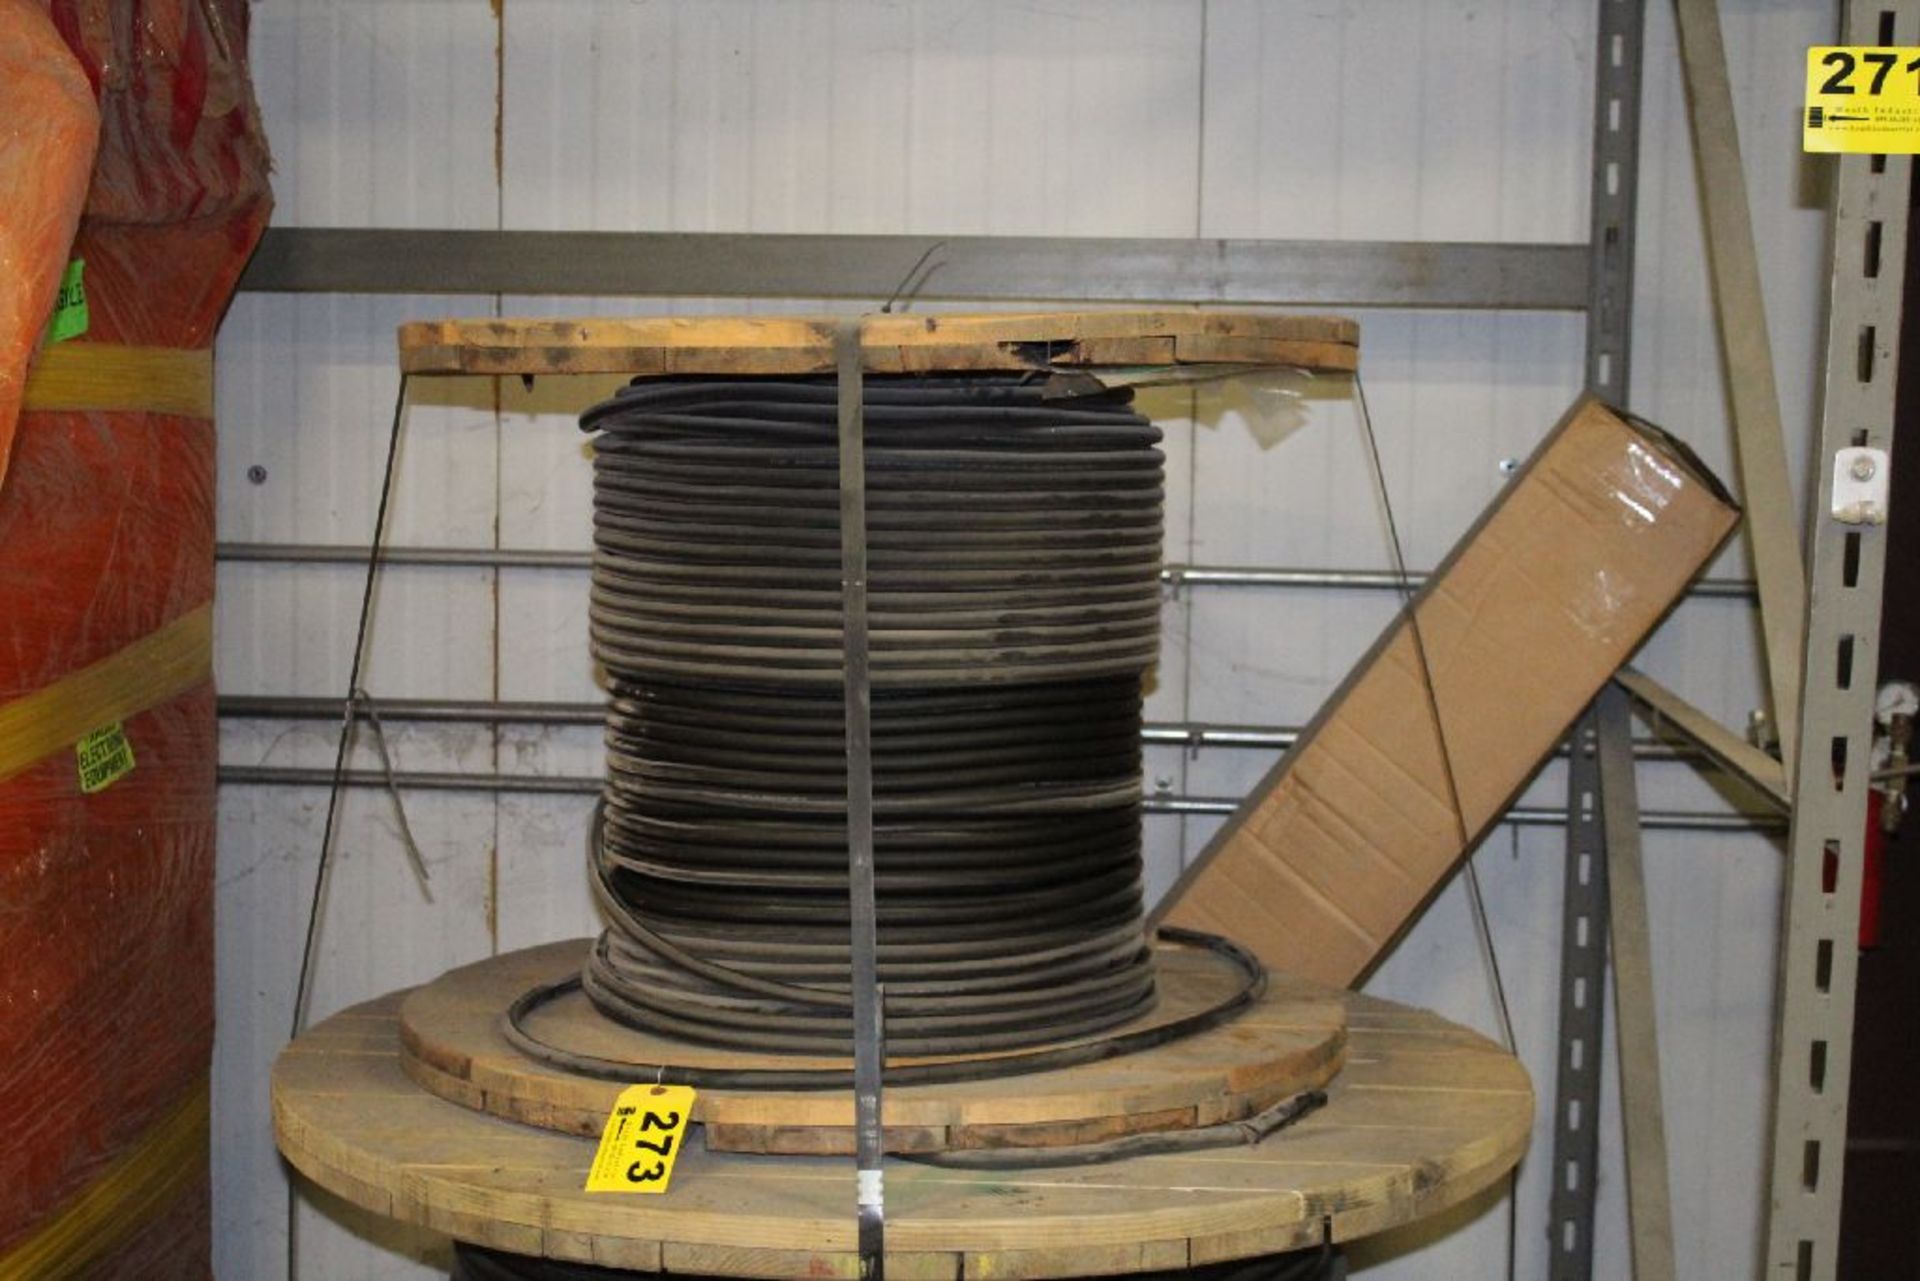 LARGE SPOOL OF WIRE